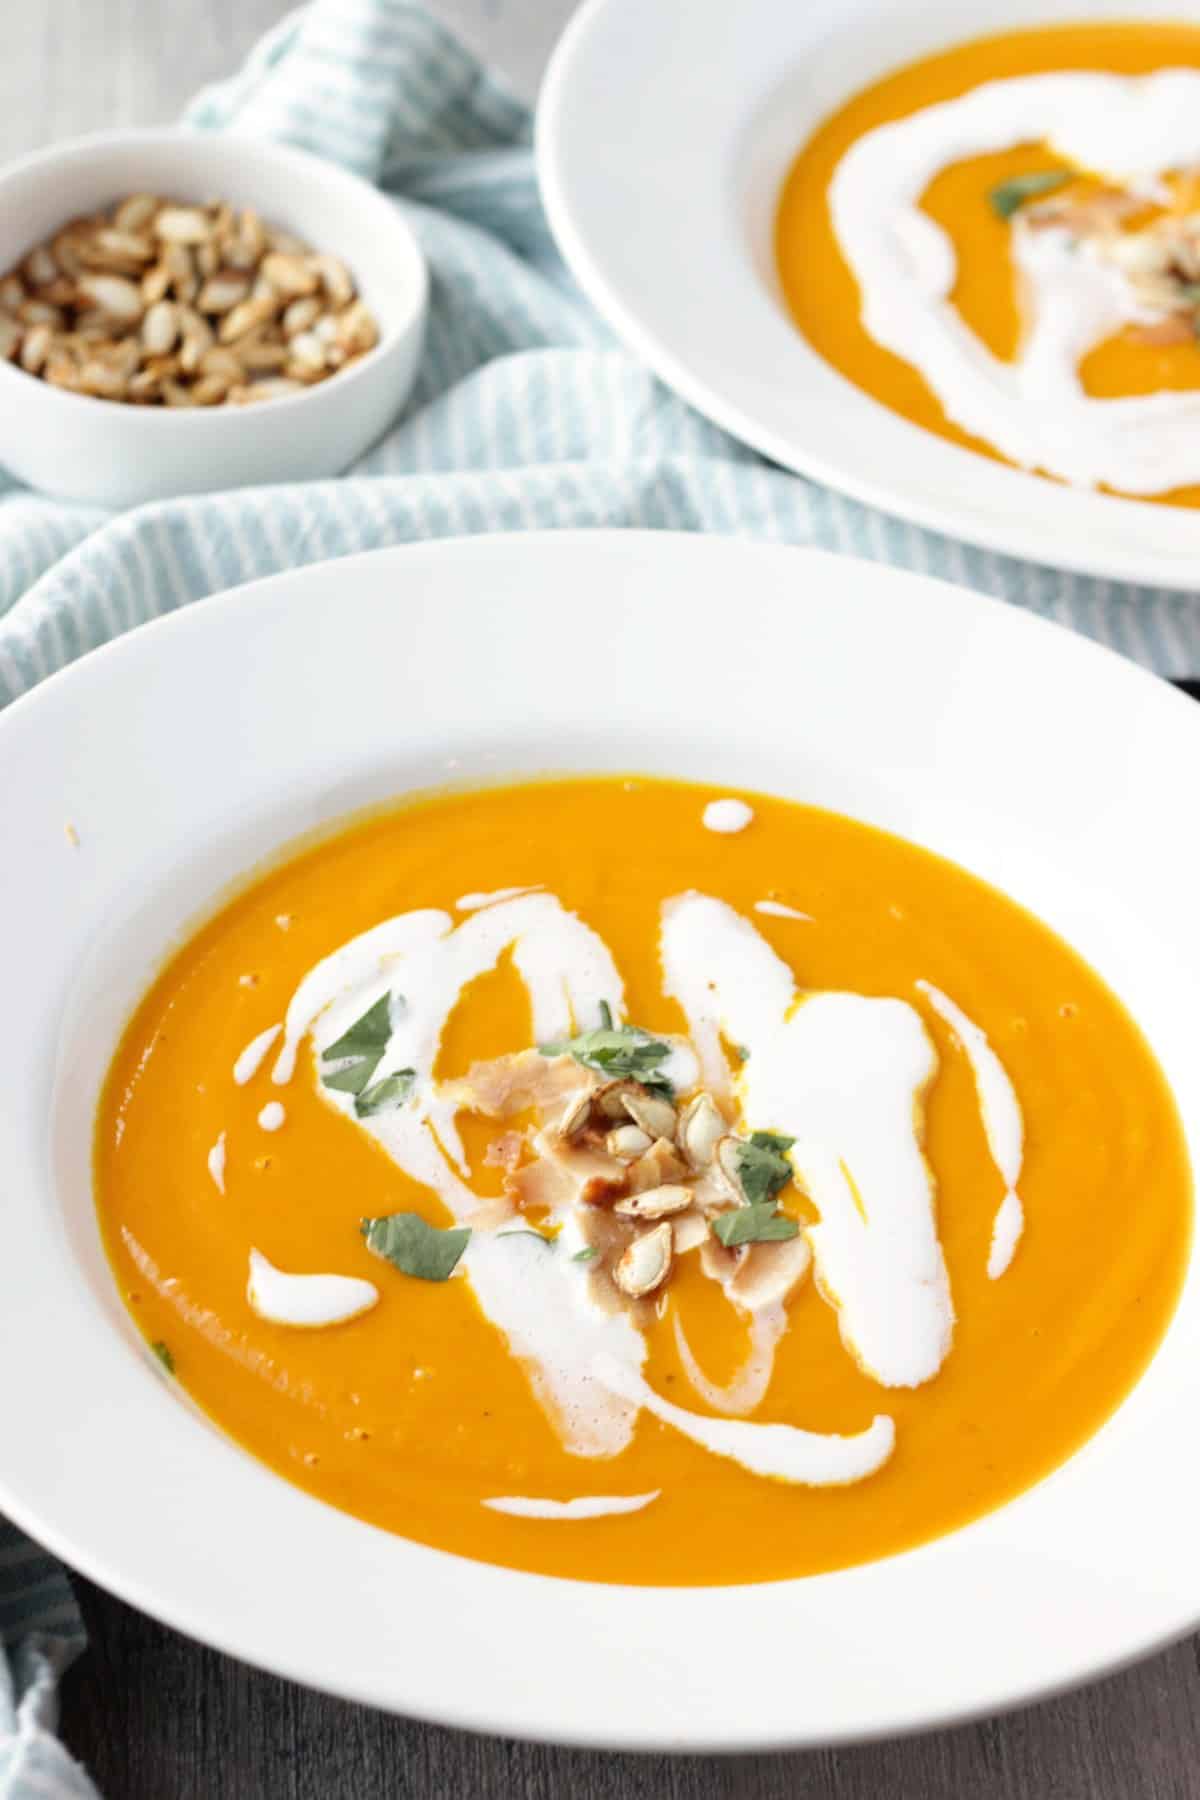 Two bowls of butternut squash soup with coconut cream, cilantro, and roasted squash seeds taken in perspective. A small bowl of squash seeds and 2 spoons are on top of a white and blue striped cloth and wood background.